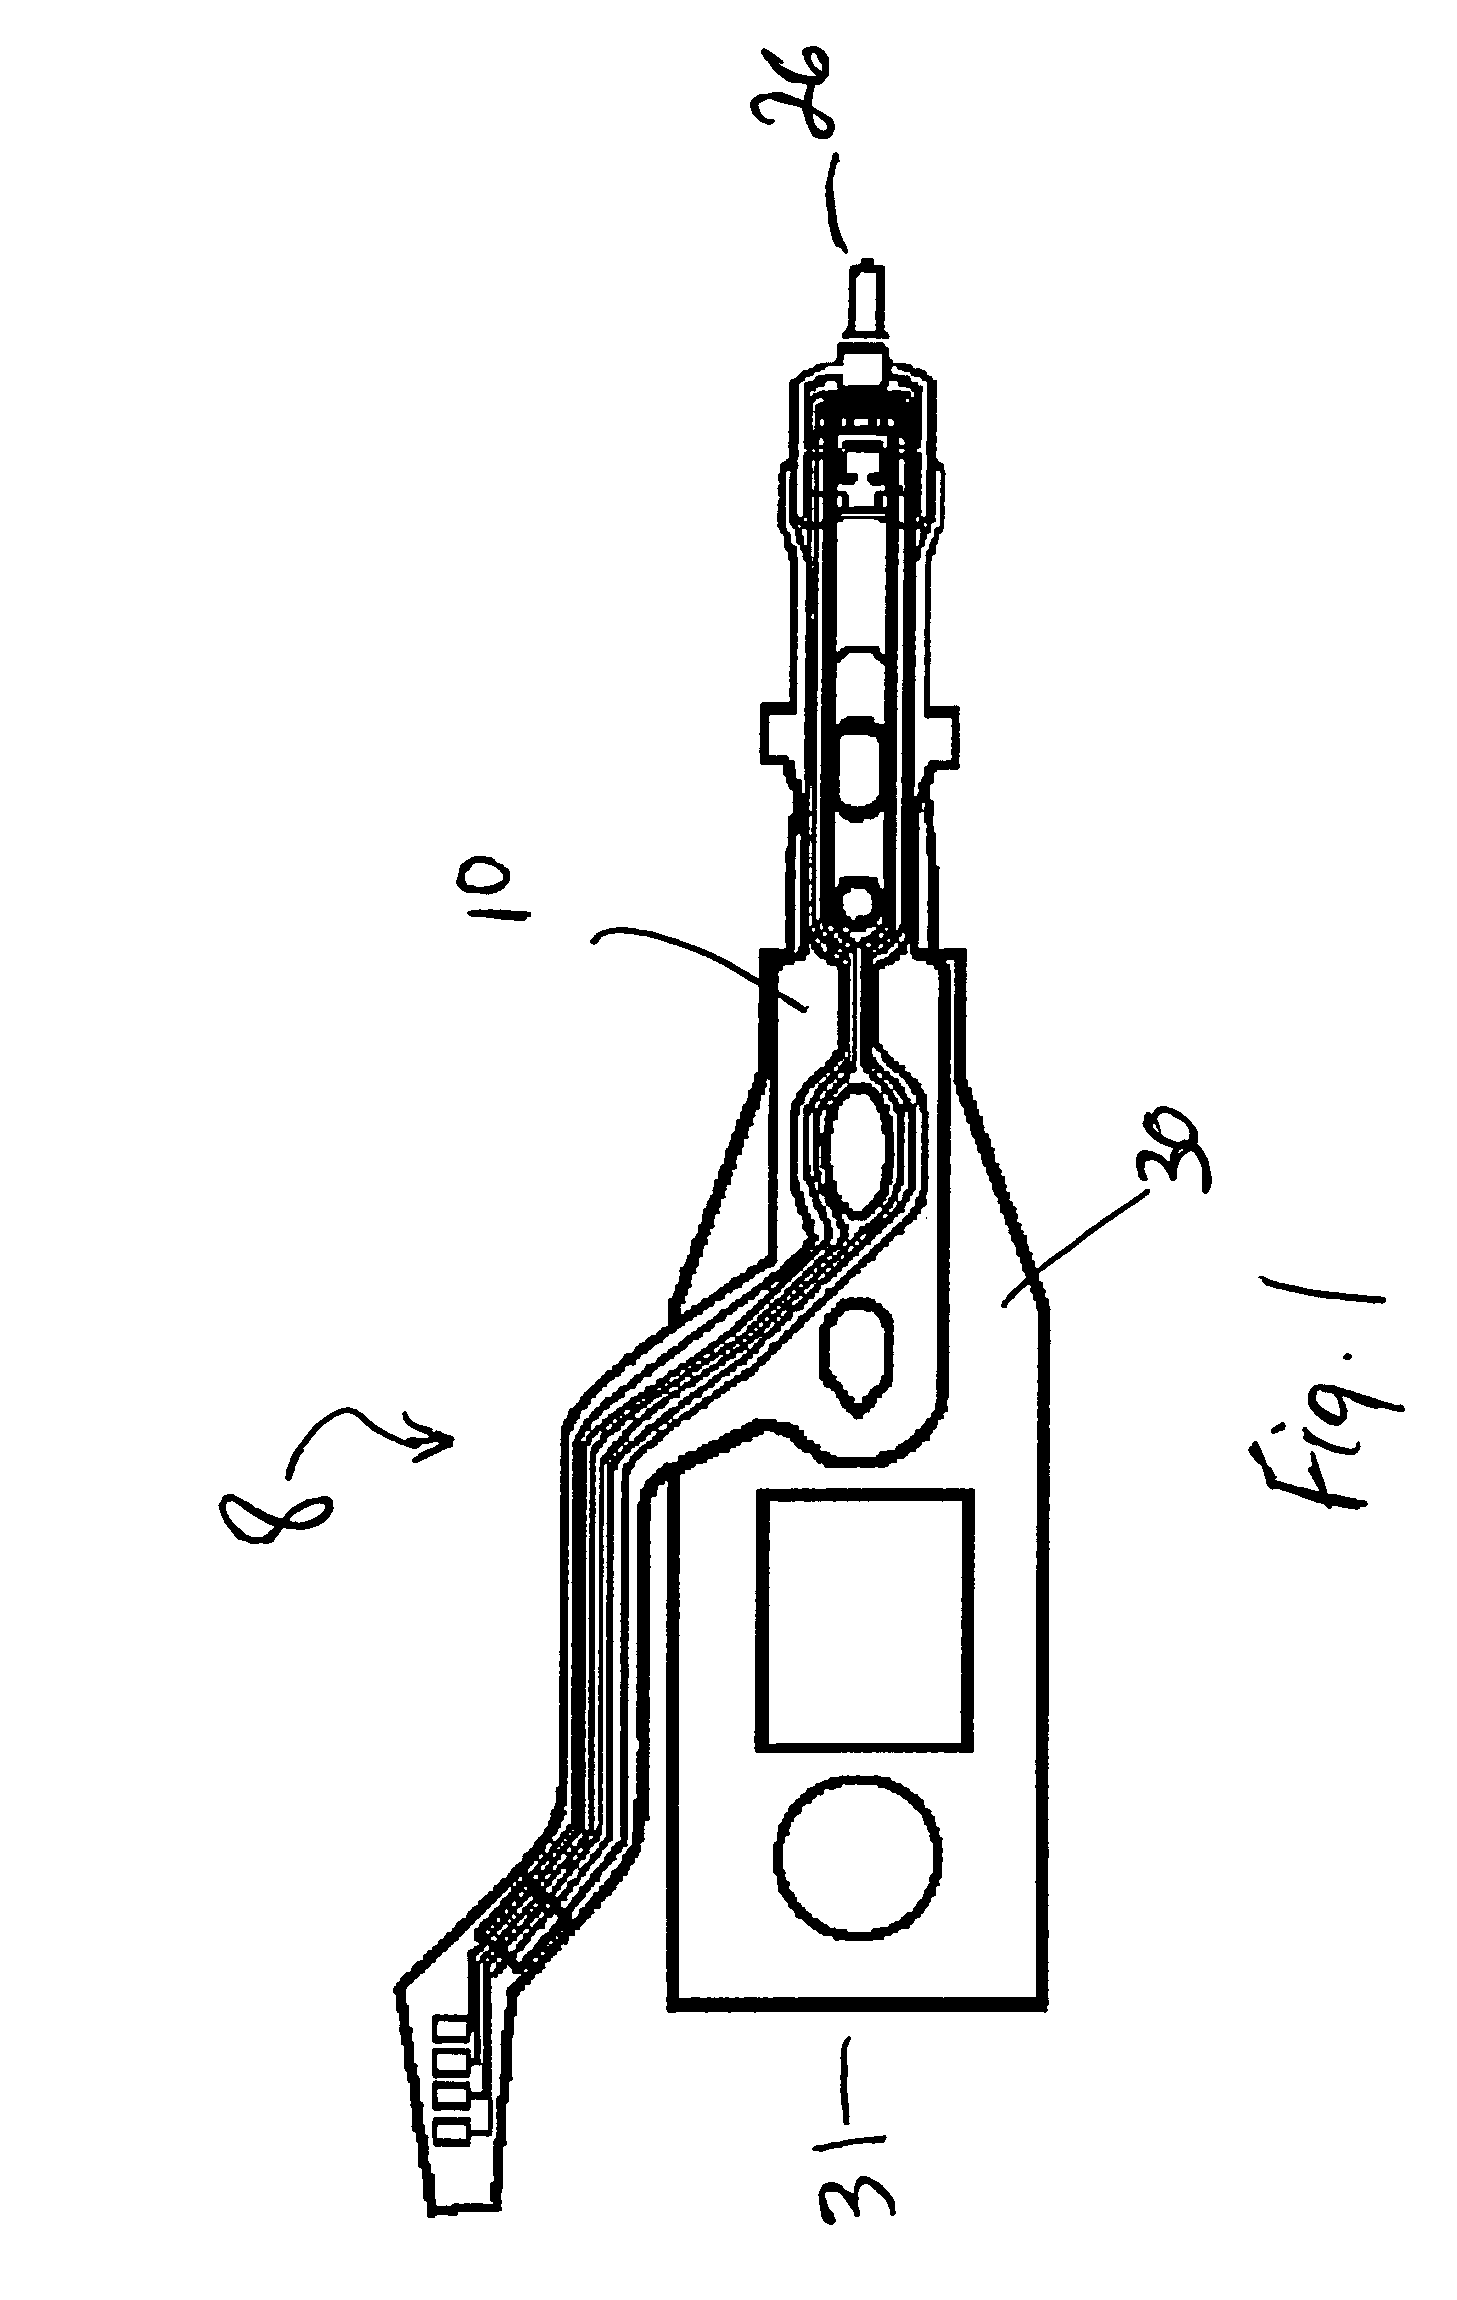 Method for making noble metal conductive leads for suspension assemblies